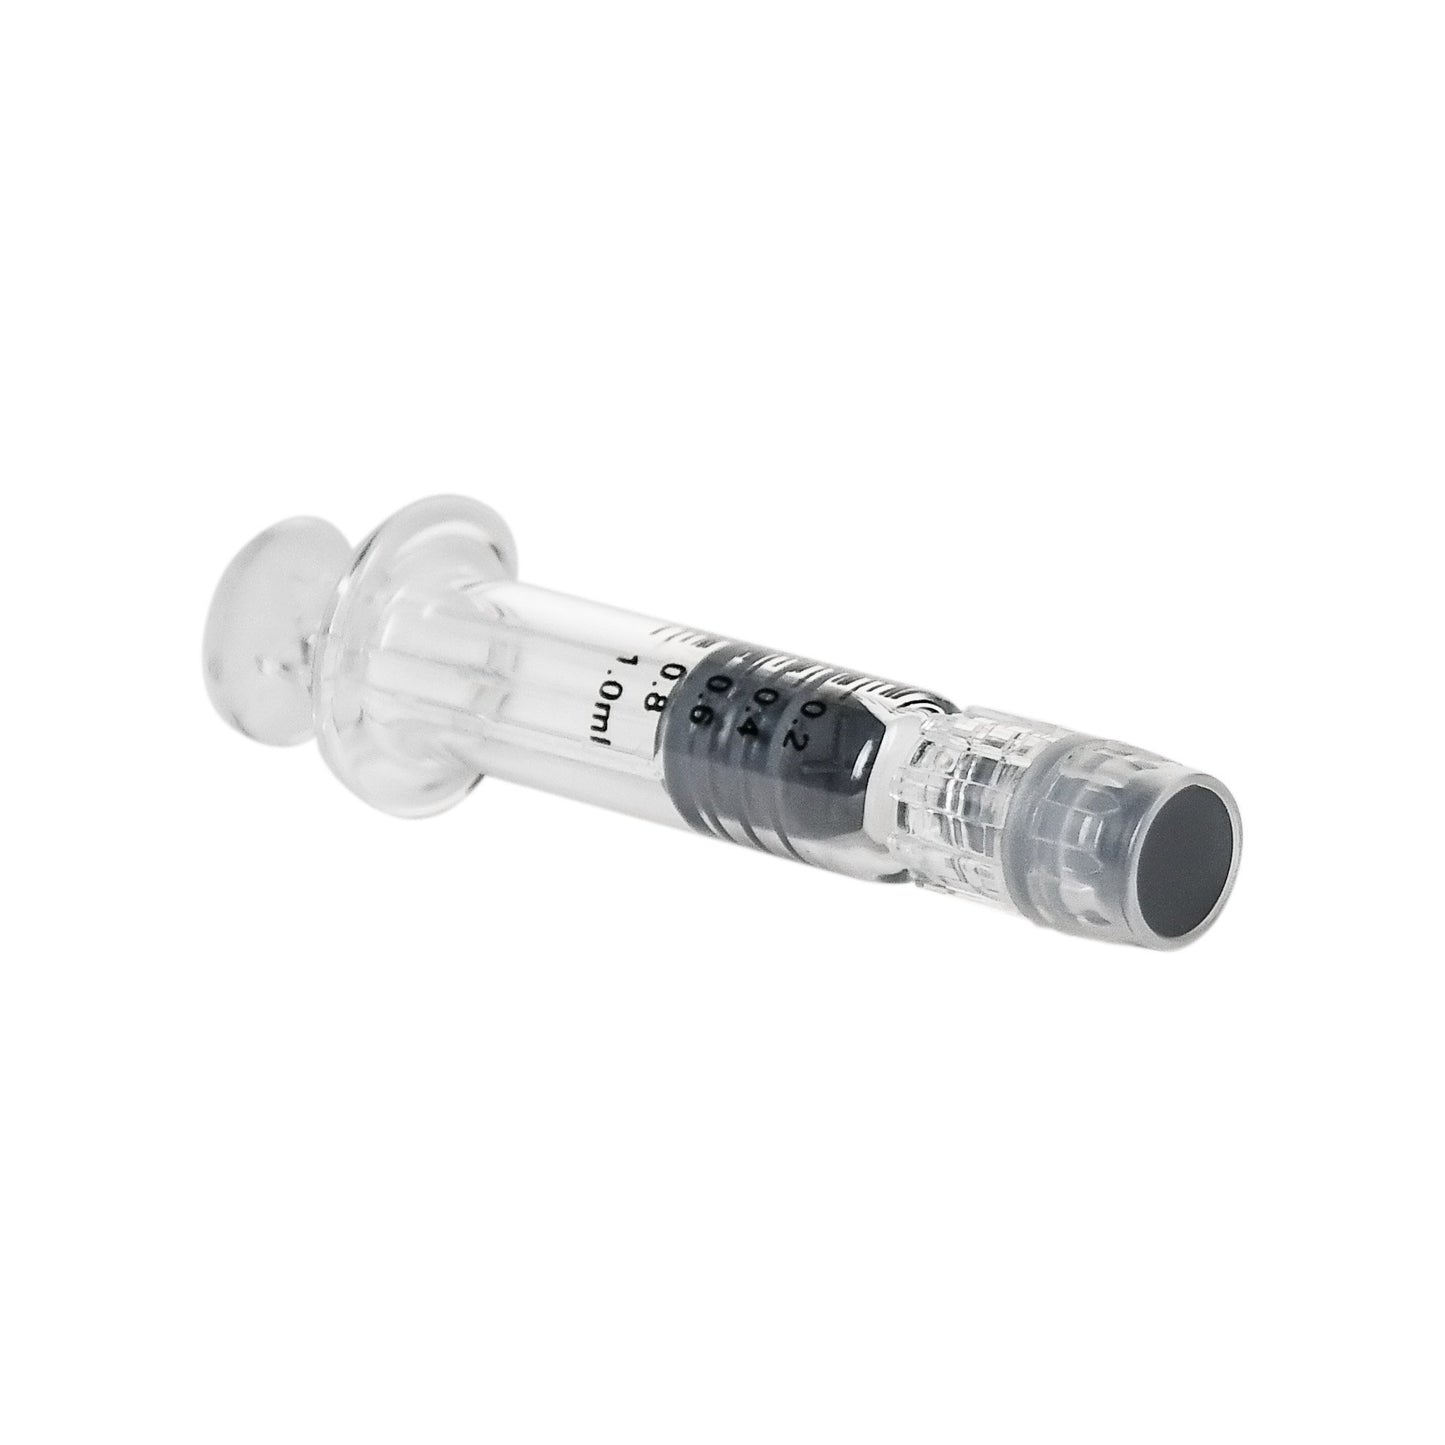 1ml Glass Luer Lock Applicator Syringe 100 Count at Flower Power Packages